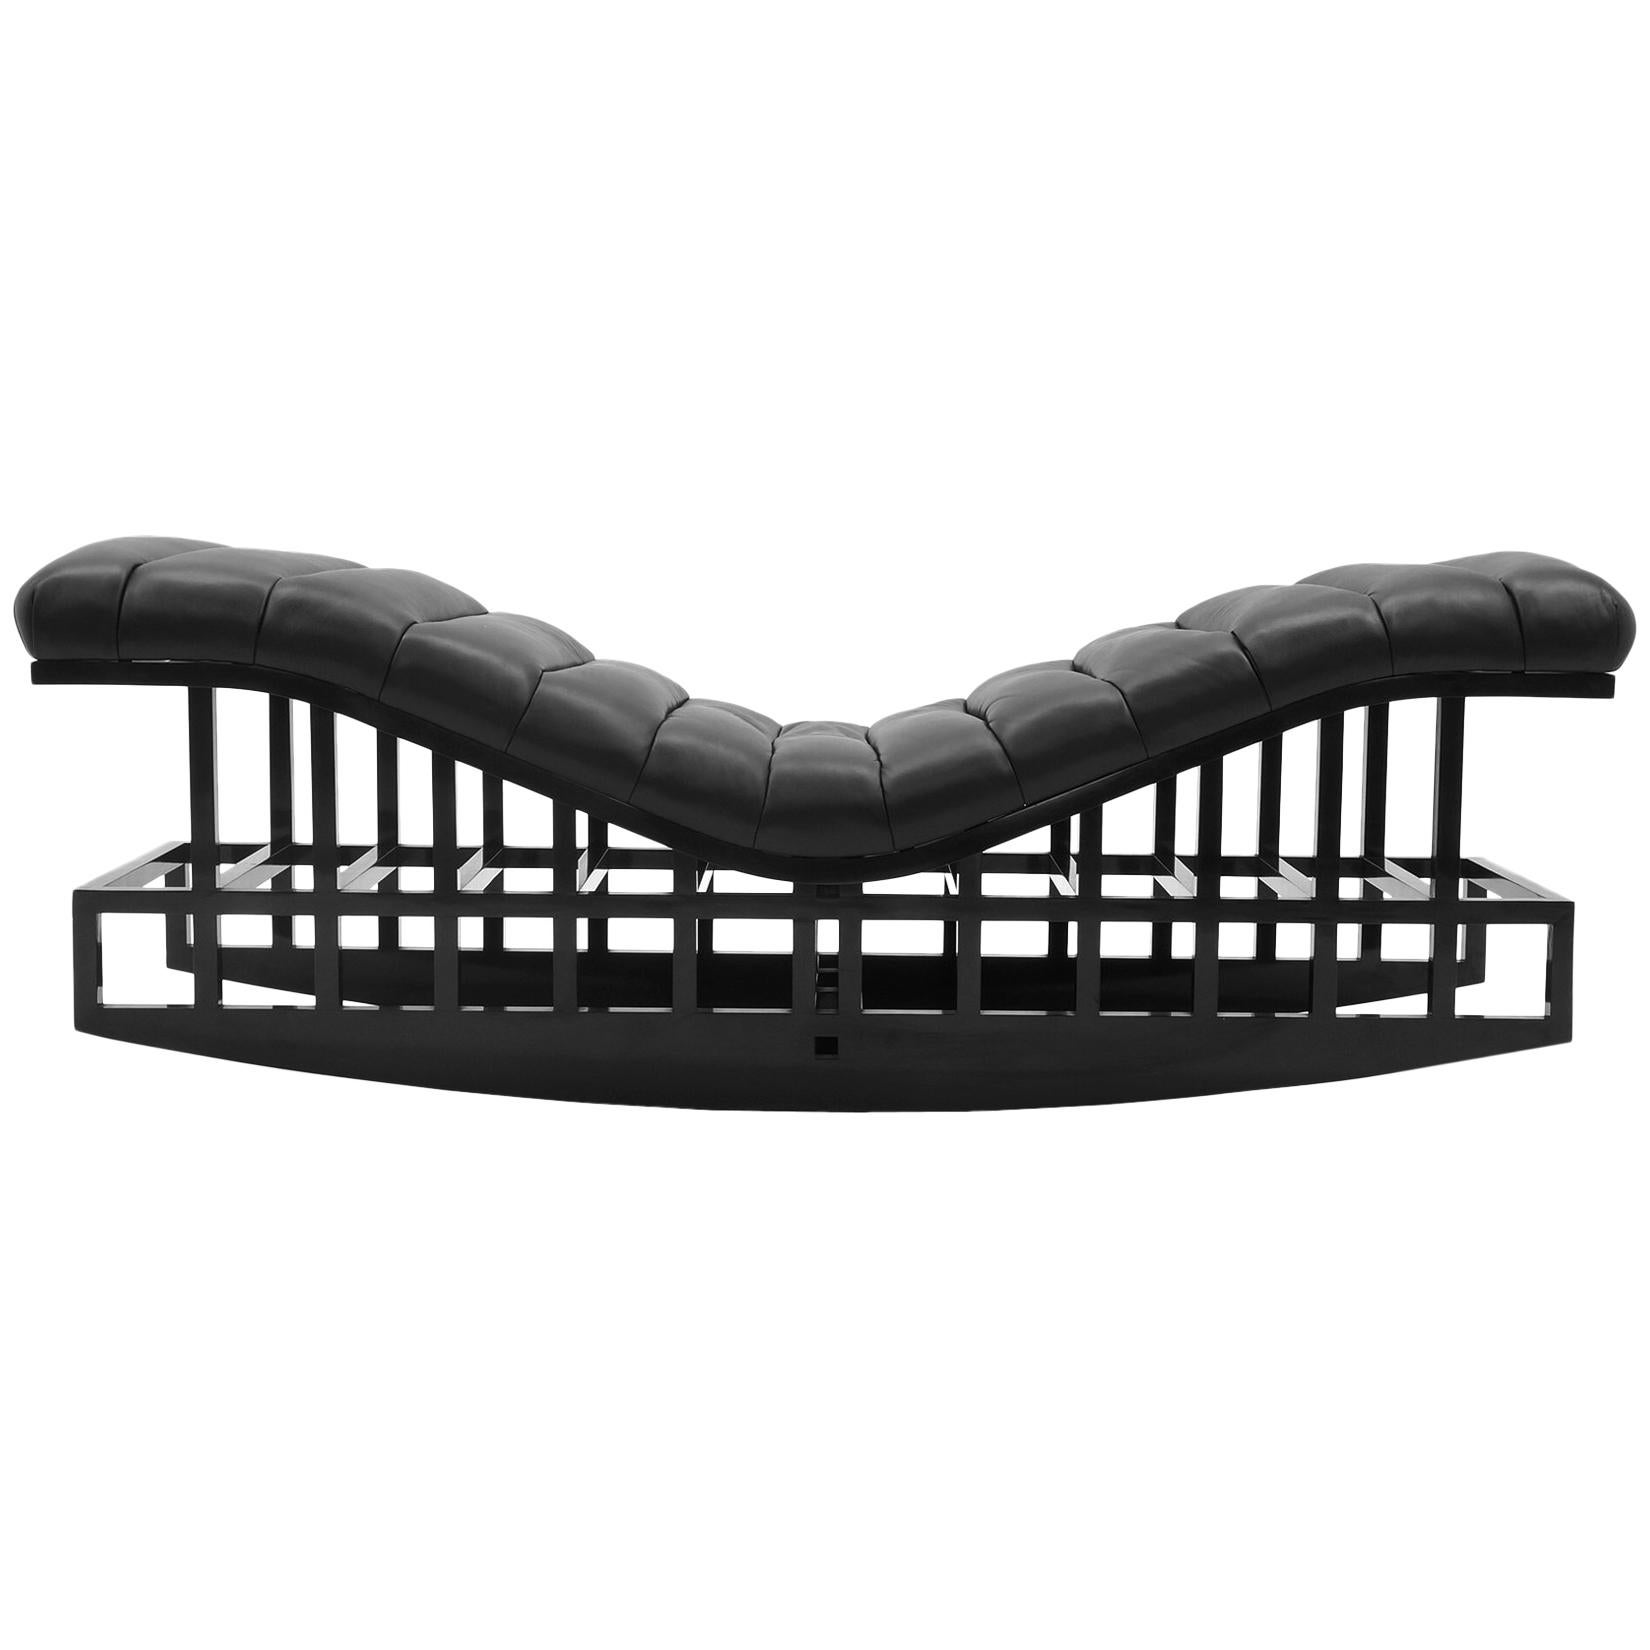 Rocking Chaise by Richard Meier for Knoll, 1982. Black Leather. Rare. Signed. For Sale